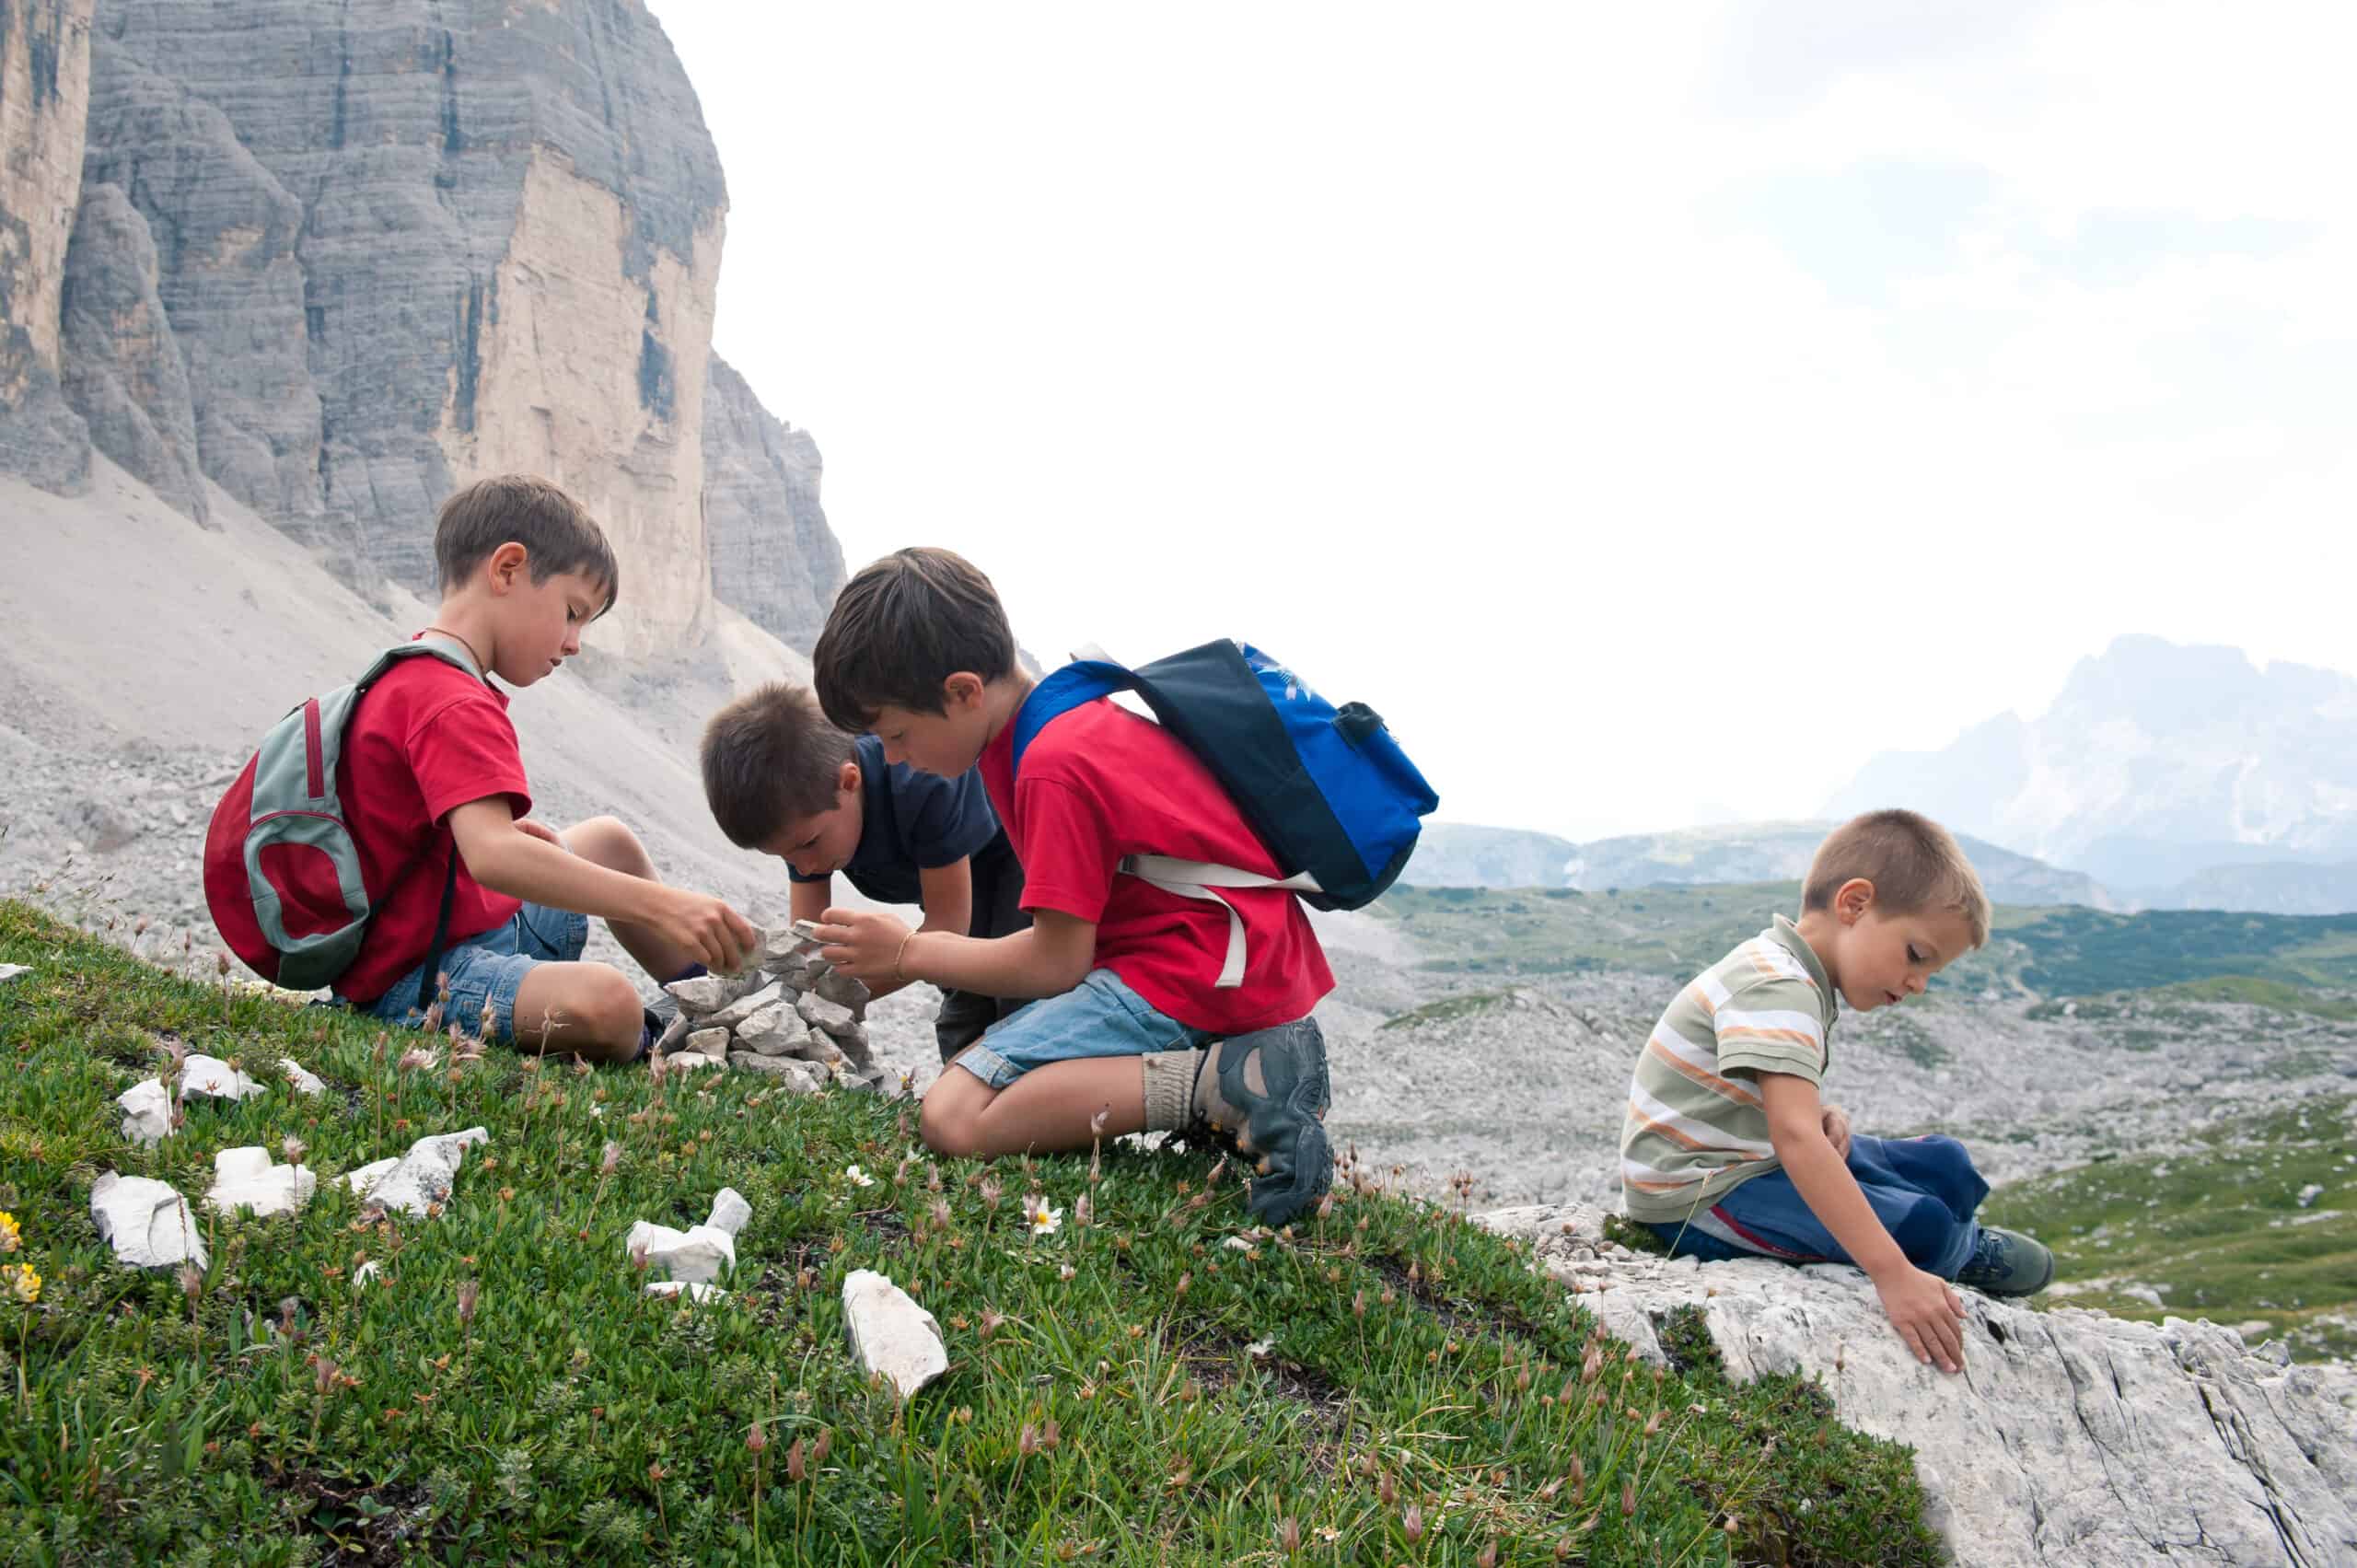 Kids playing in the mountains. Dolomites, Italy.